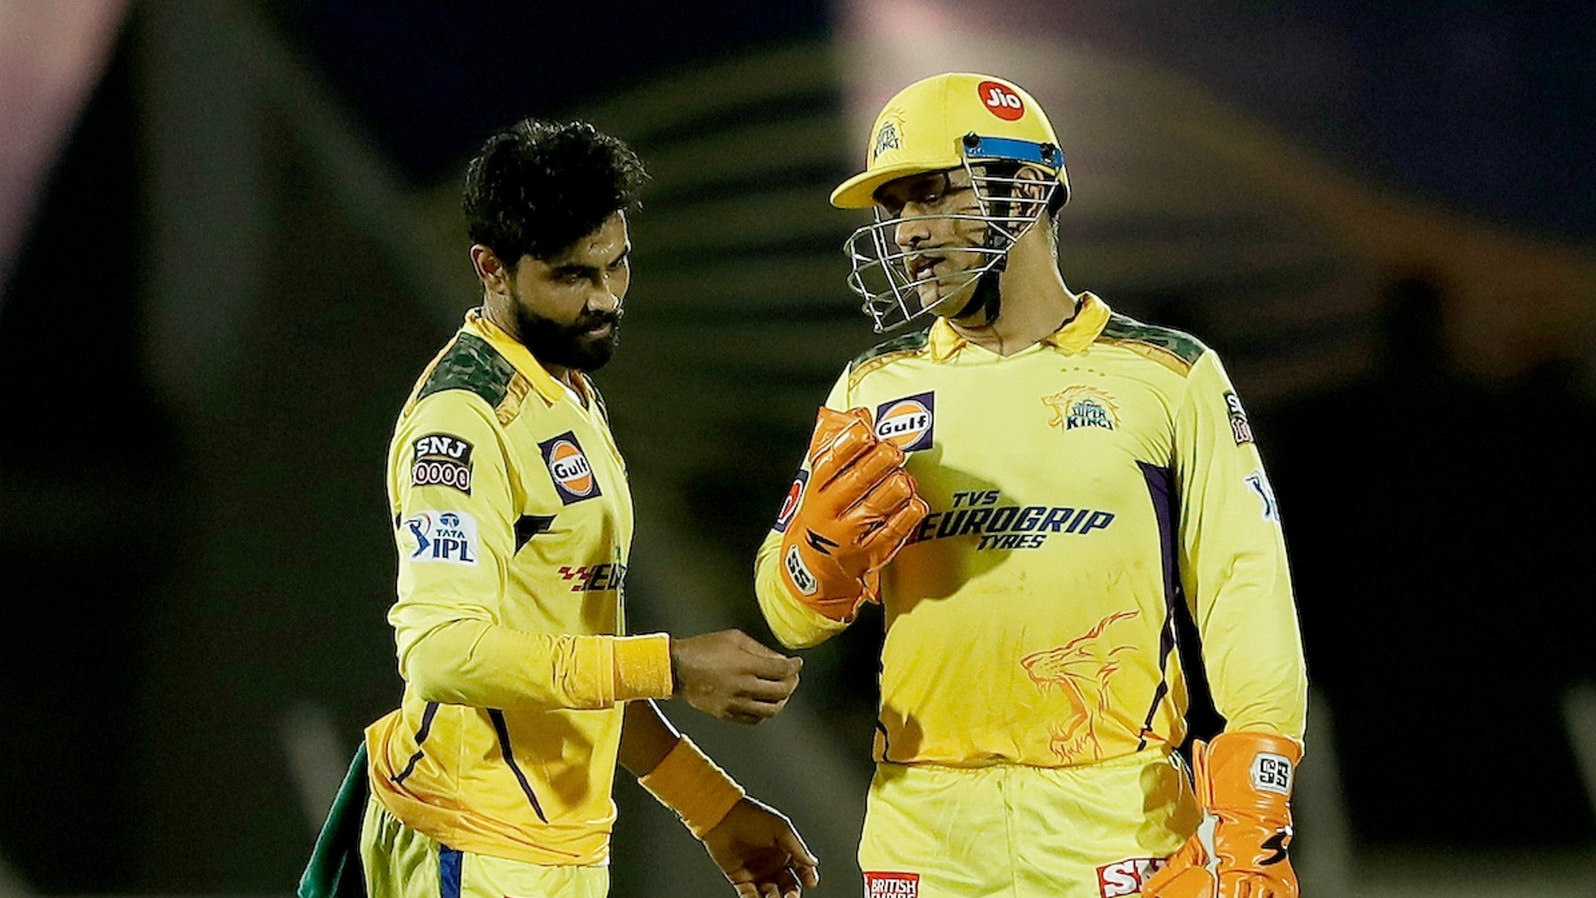 IPL 2022: Ravindra Jadeja was forced to hand over CSK captaincy to MS Dhoni – Report